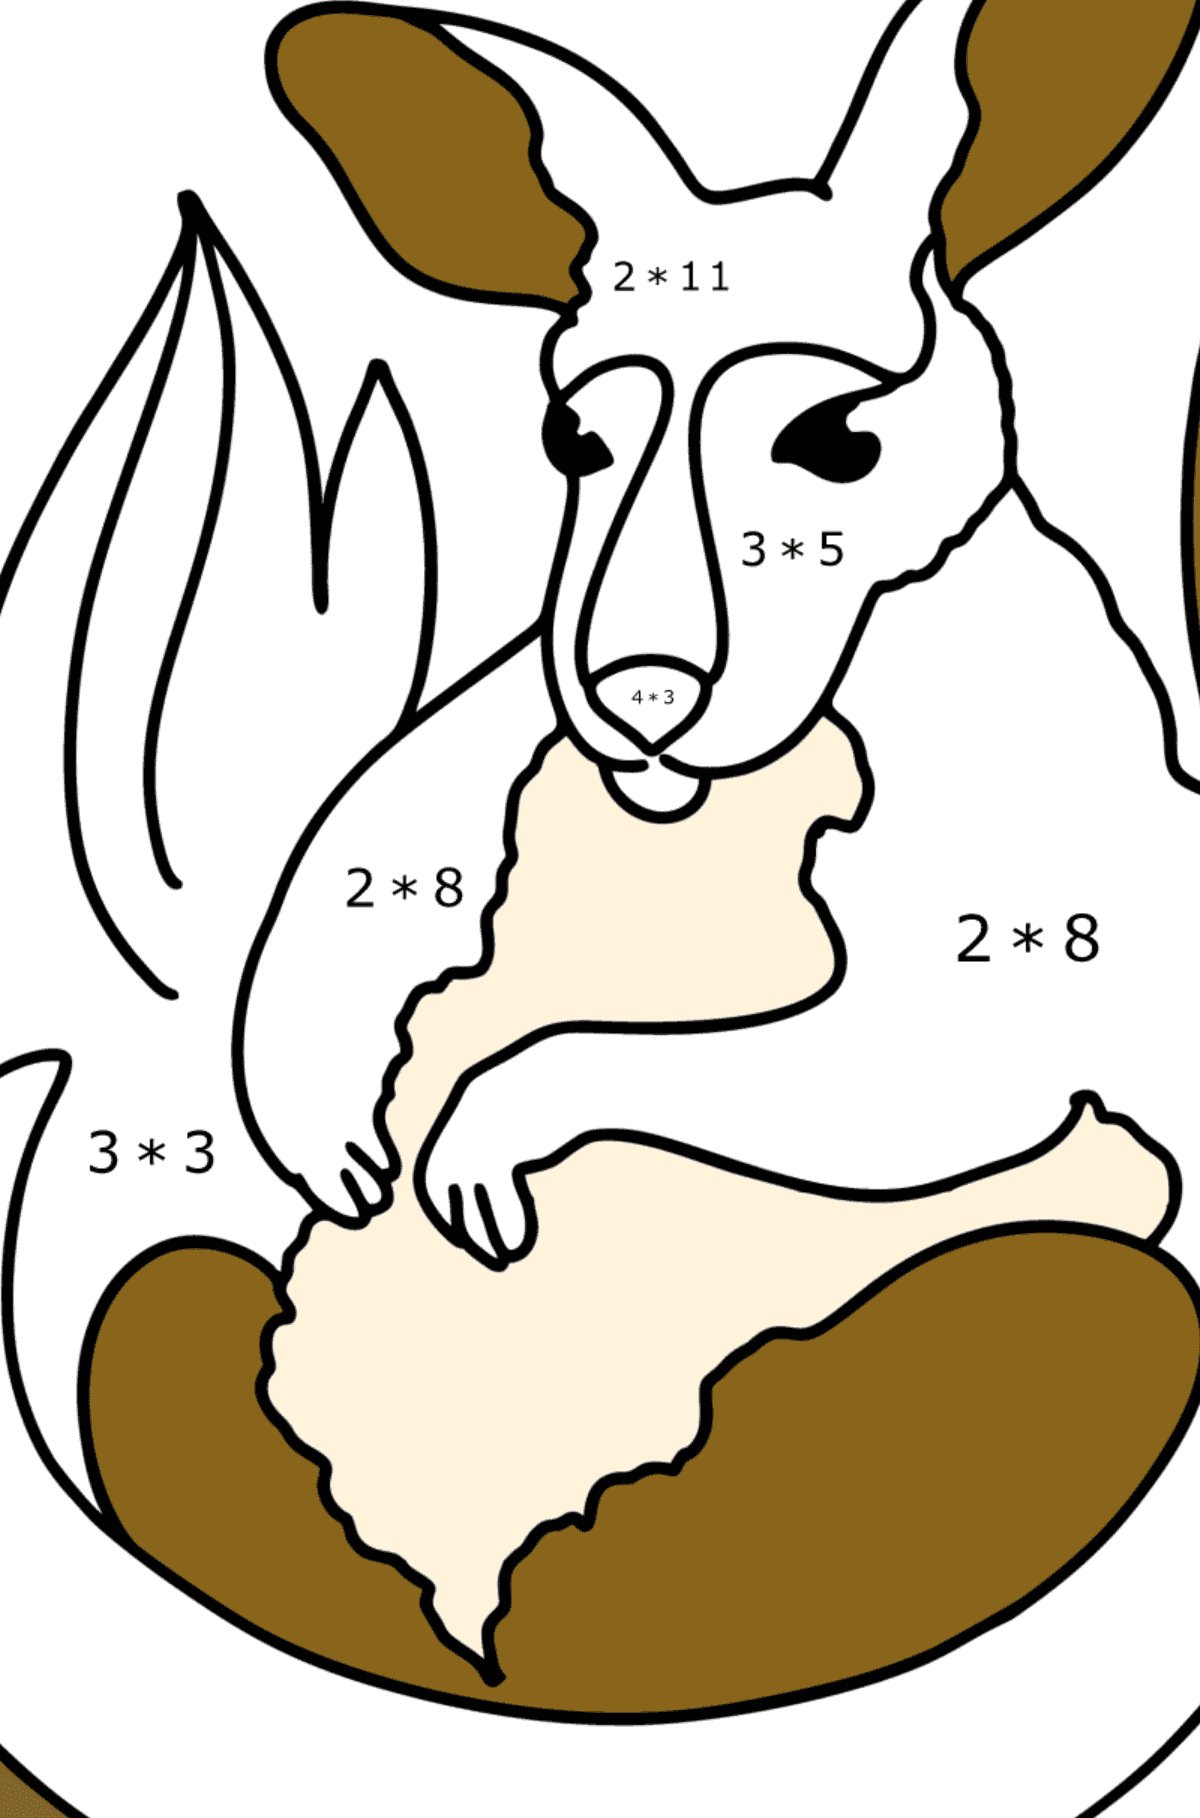 Coloring page - Adorable baby kangaroo - Math Coloring - Multiplication for Kids